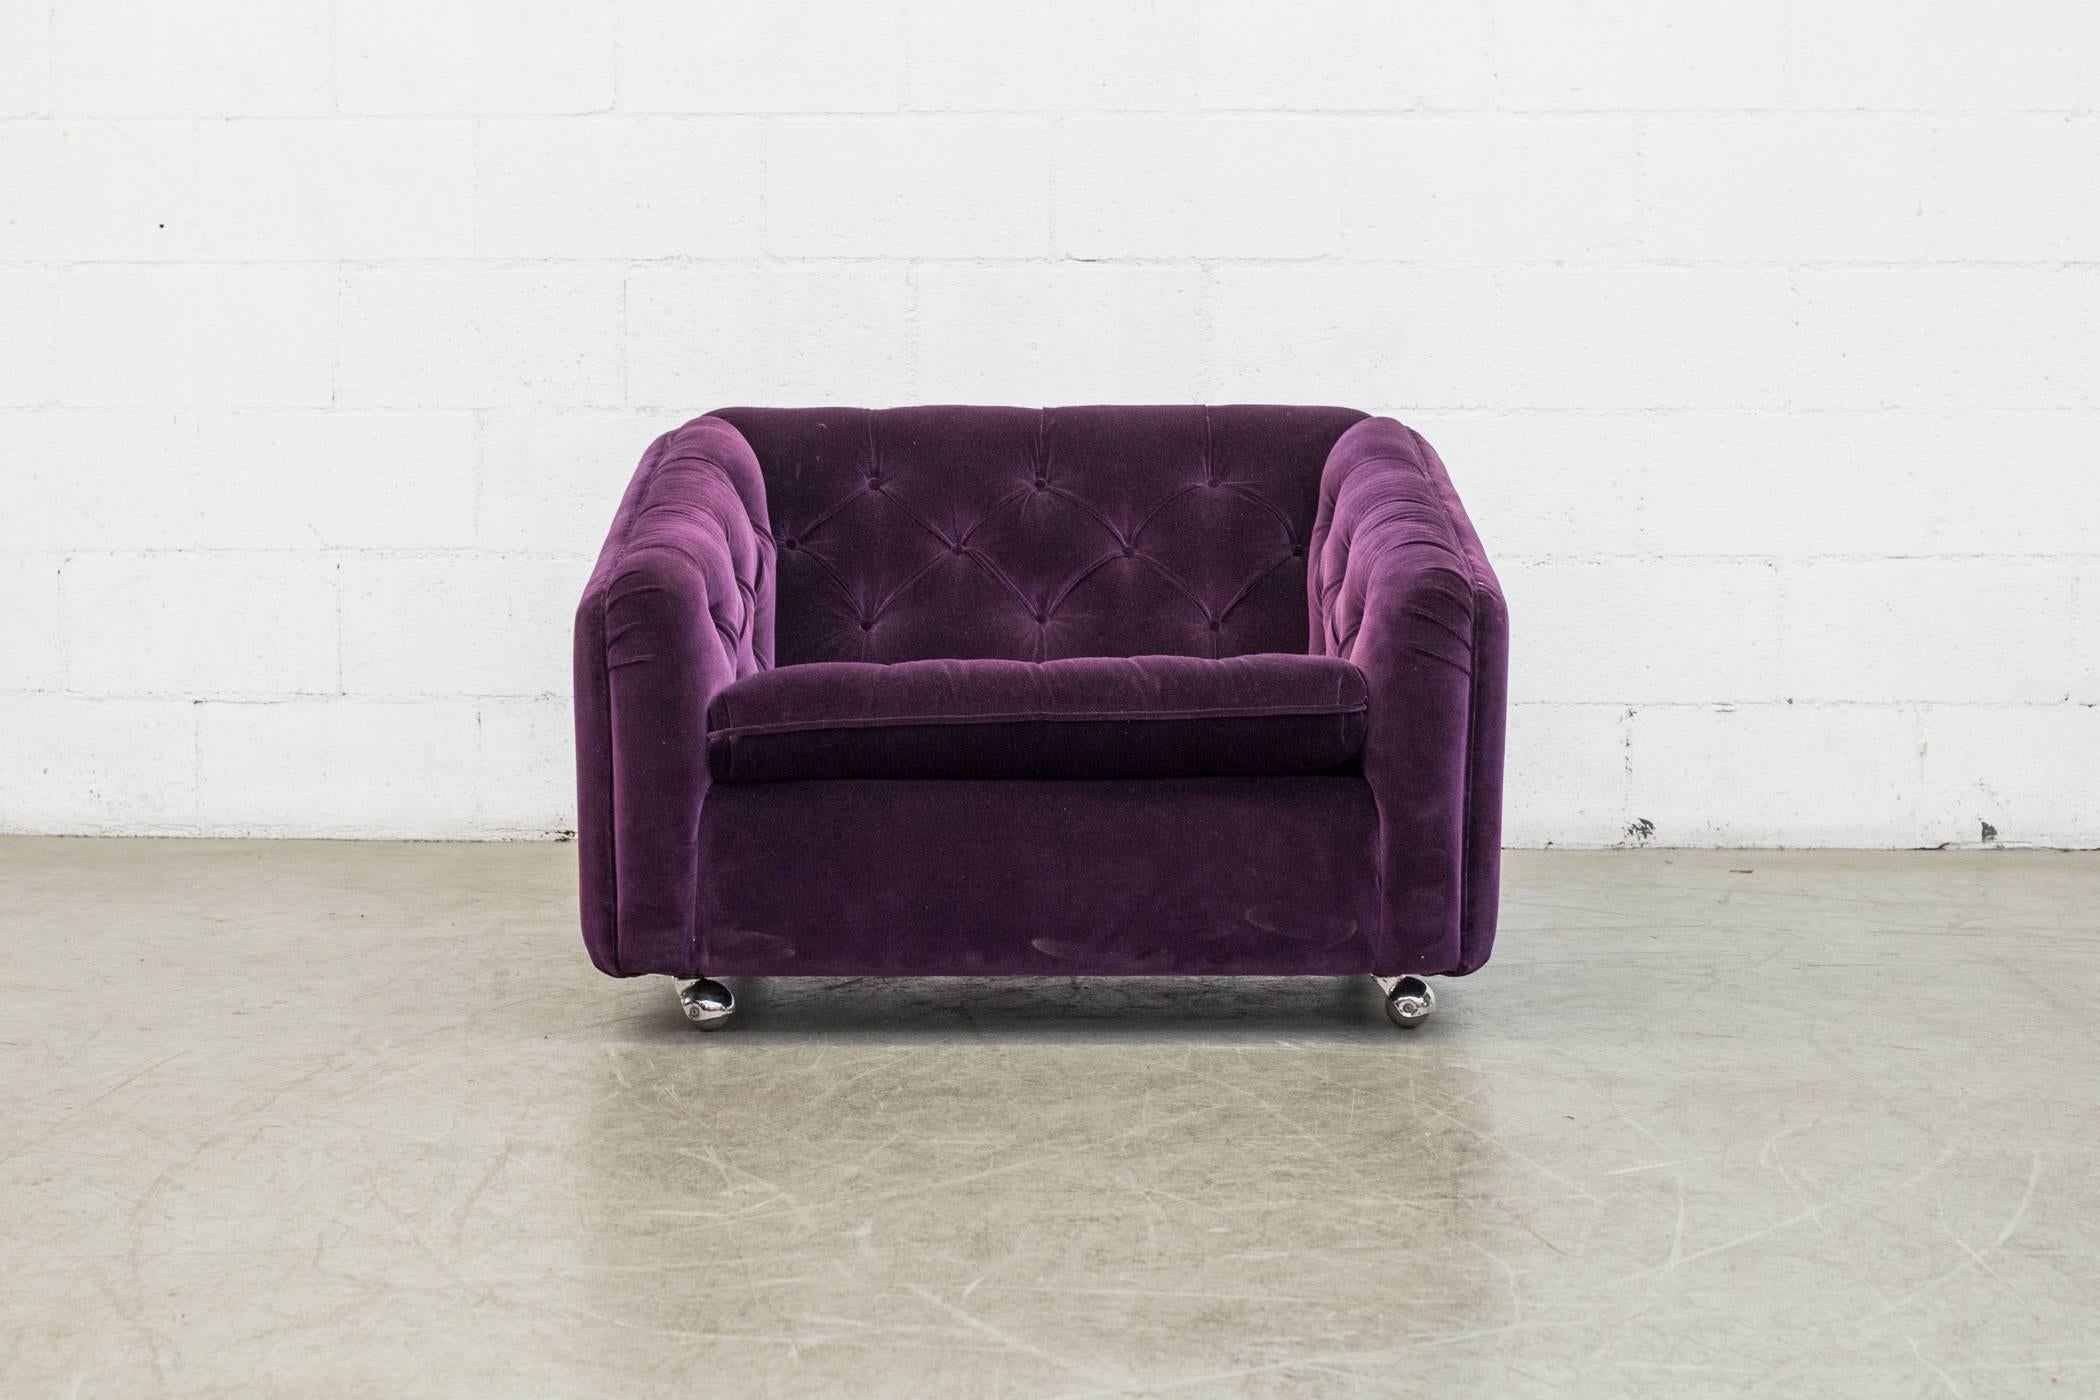 Amazing comfy Artifort tufted lounge chair by Geoffrey Harcourt newly upholstered in amethyst velvet sofa on rollers. Matching tufted love seat available, listed separately.